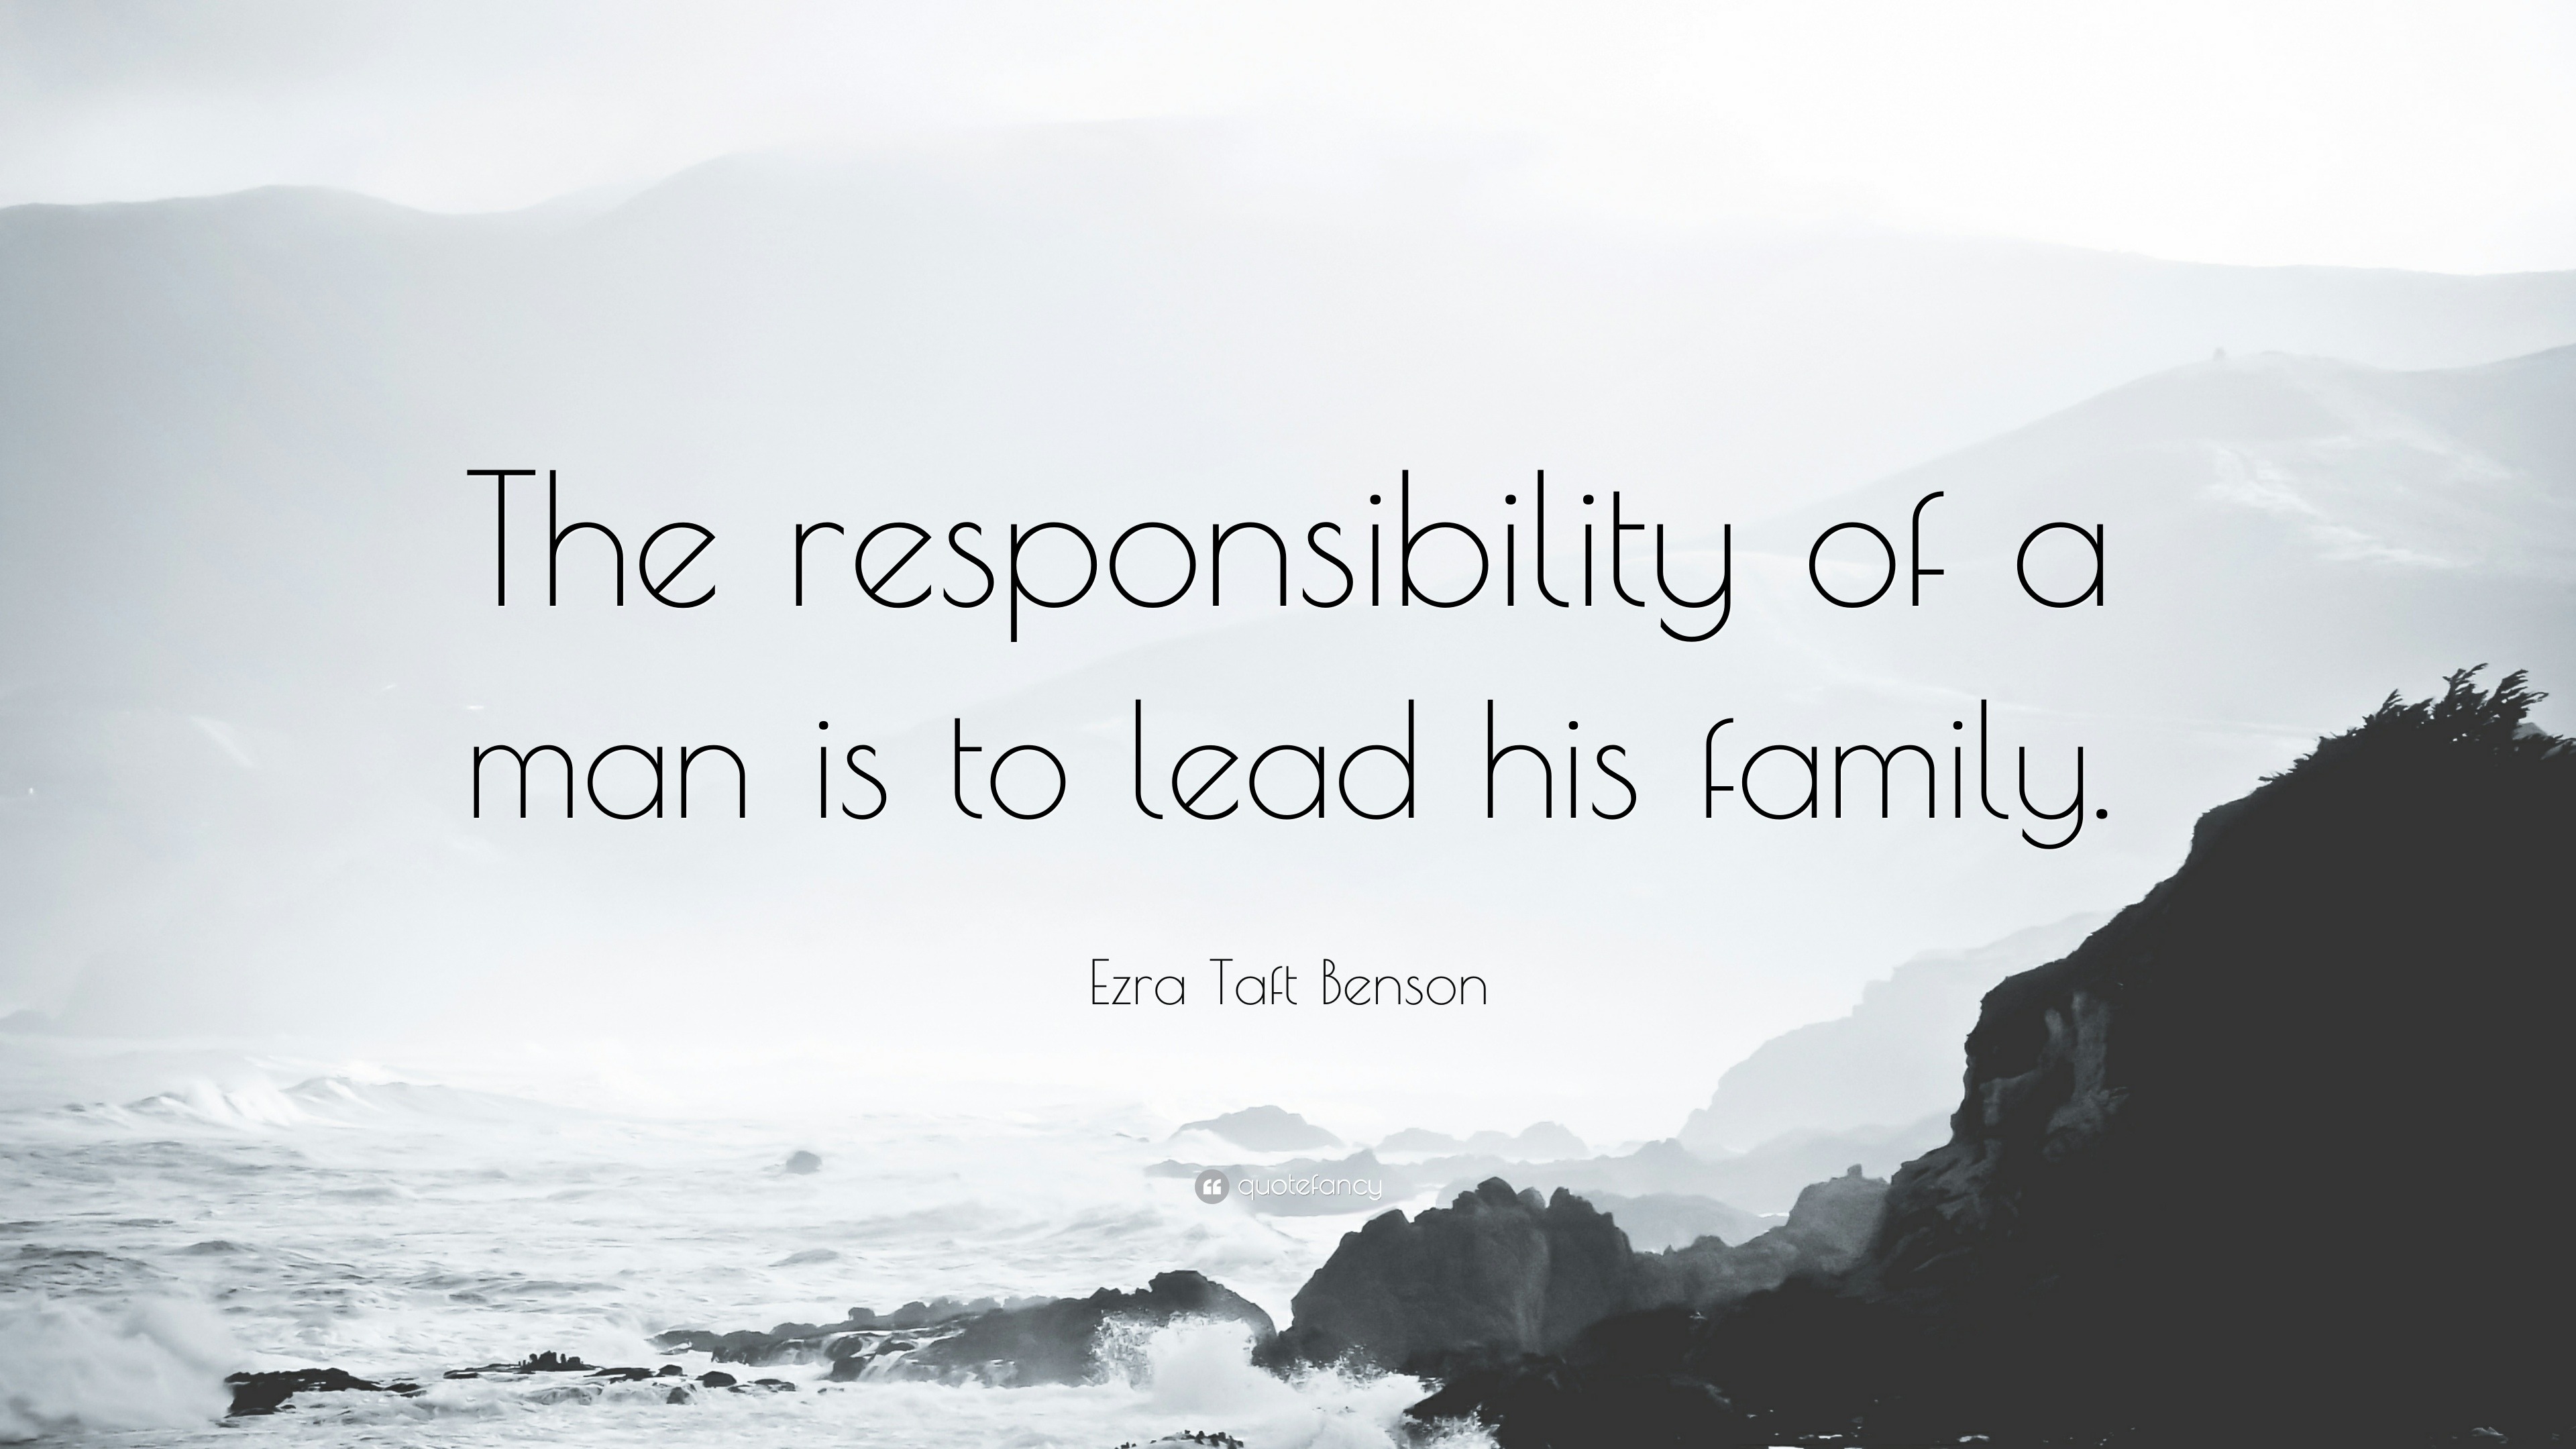 Ezra Taft Benson Quote: “The Responsibility Of A Man Is To Lead His Family.”